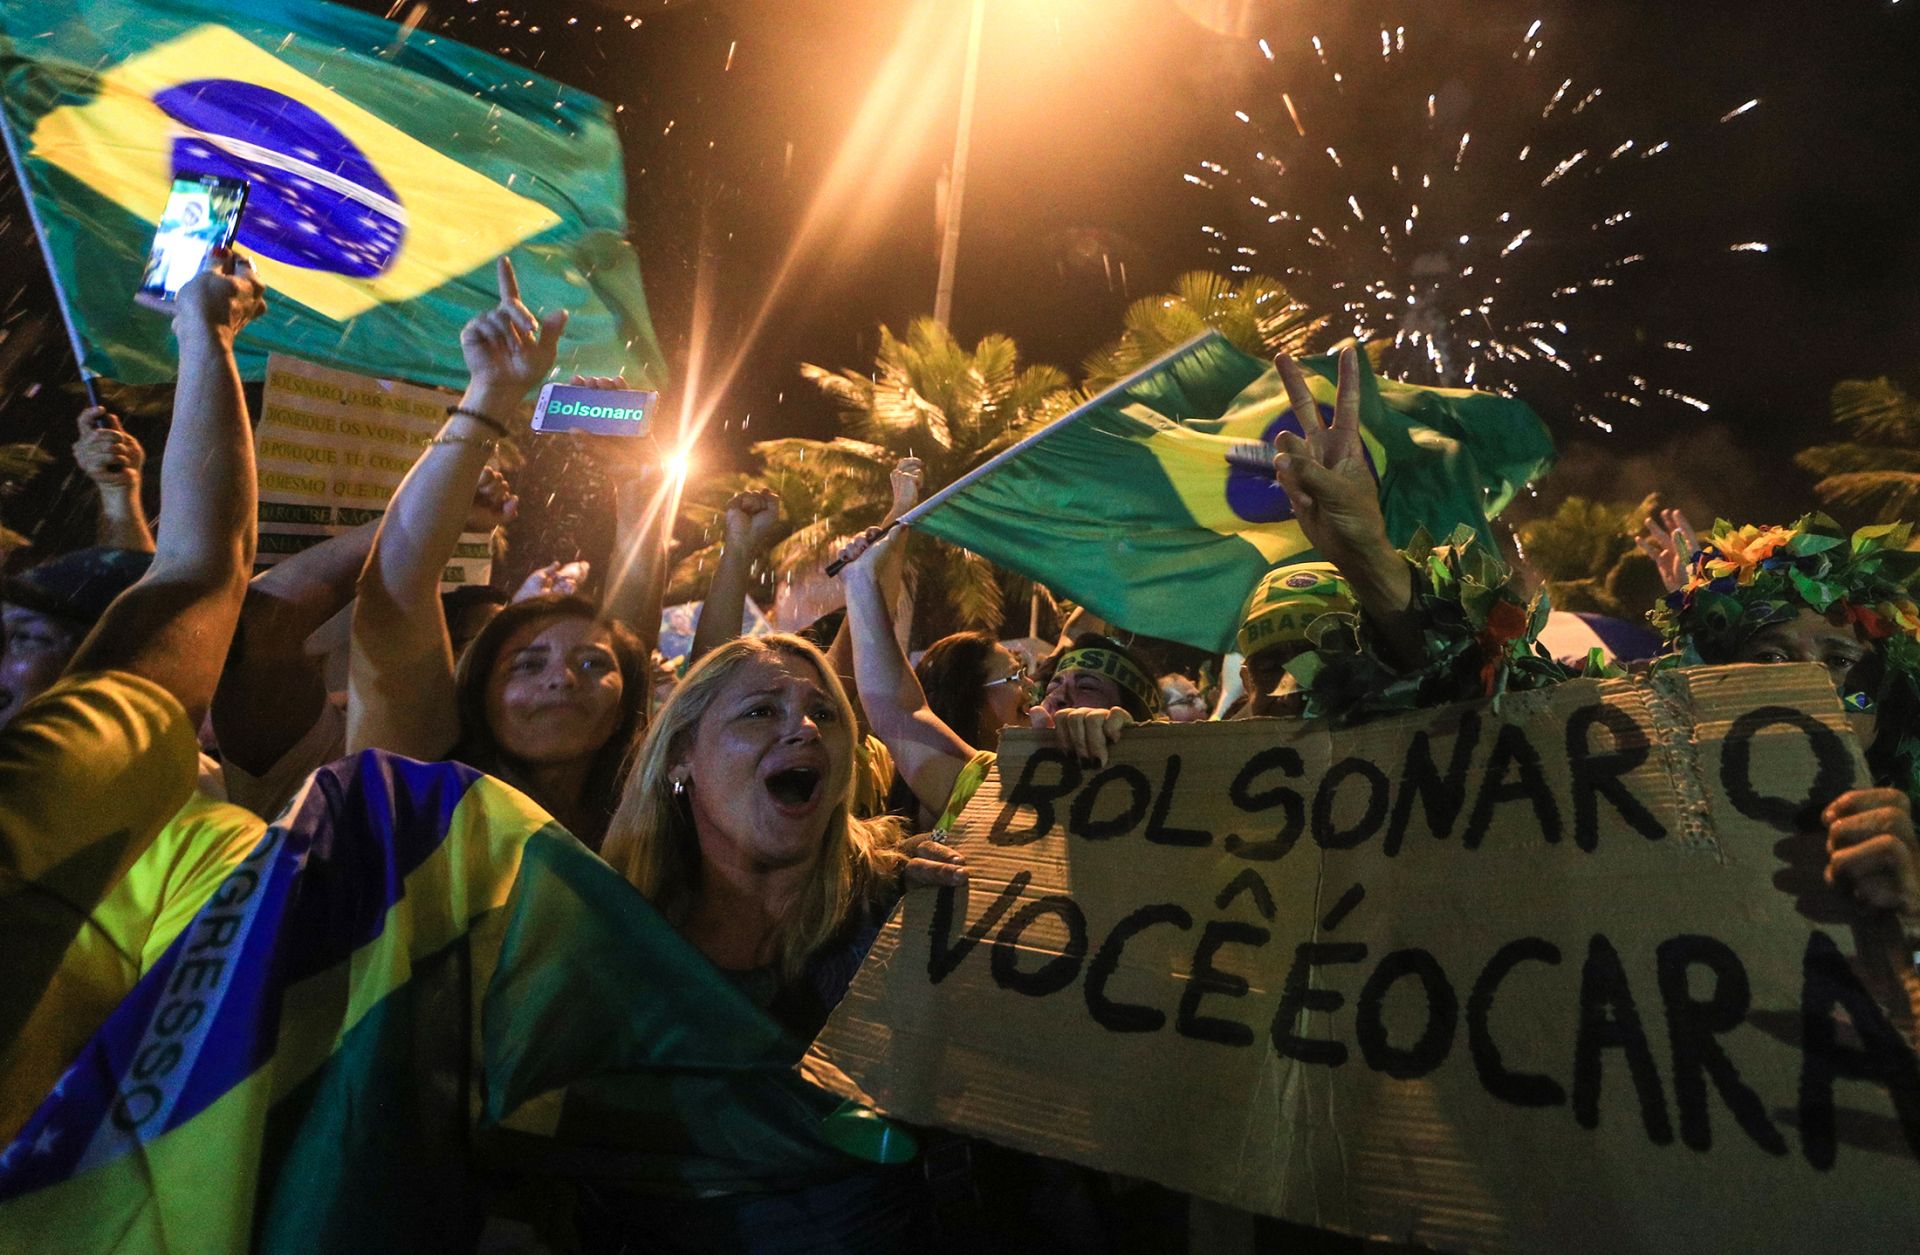 Brazilian supporters of populist candidate Jair Bolsonaro celebrate his presidential victory on Oct. 28.